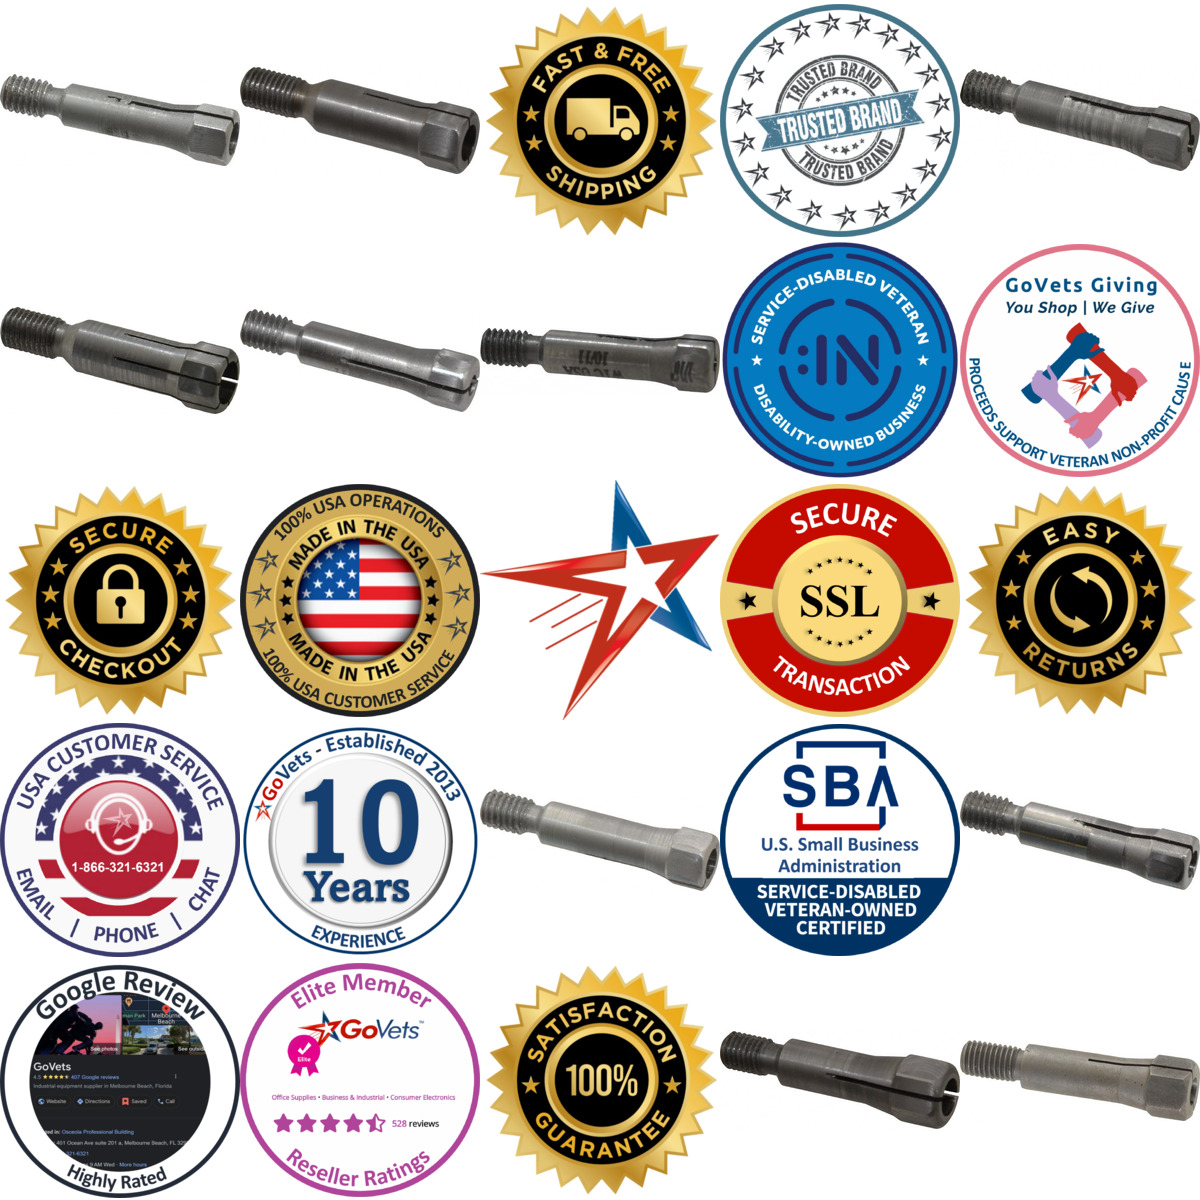 A selection of Drill Extension Collets products on GoVets